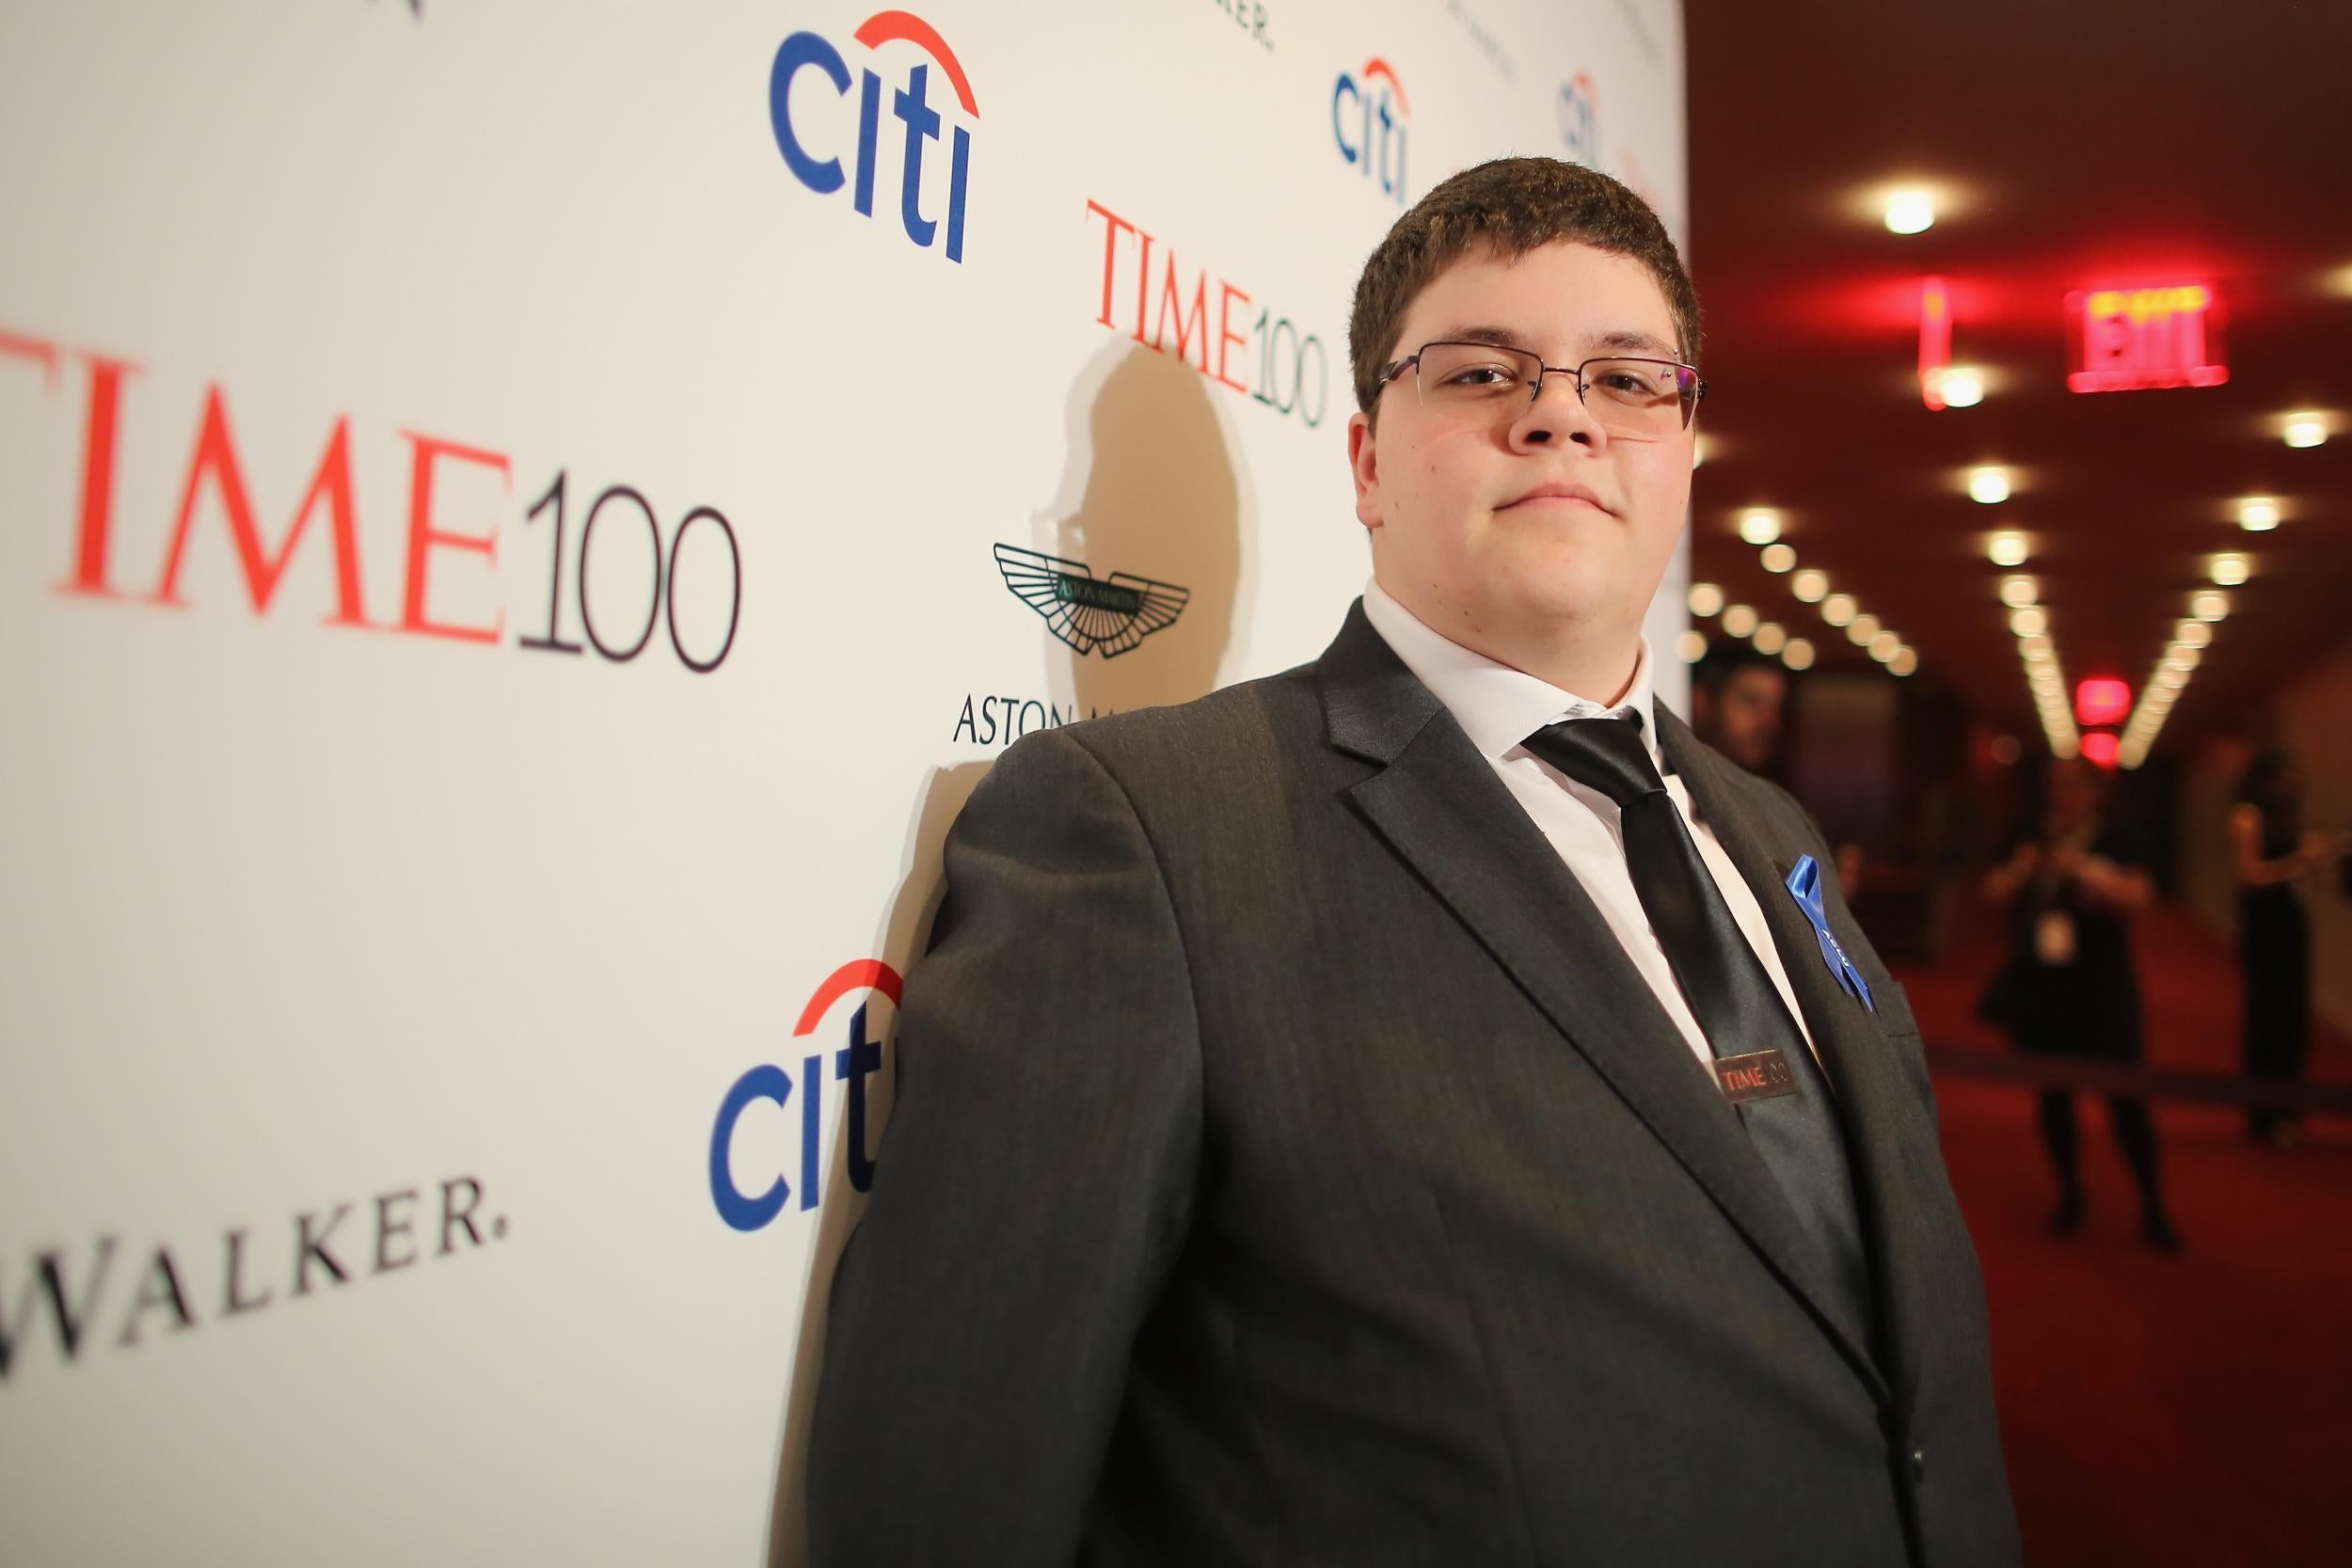 Gavin Grimm also sued his school for allegedly discriminating against him as a transgender man